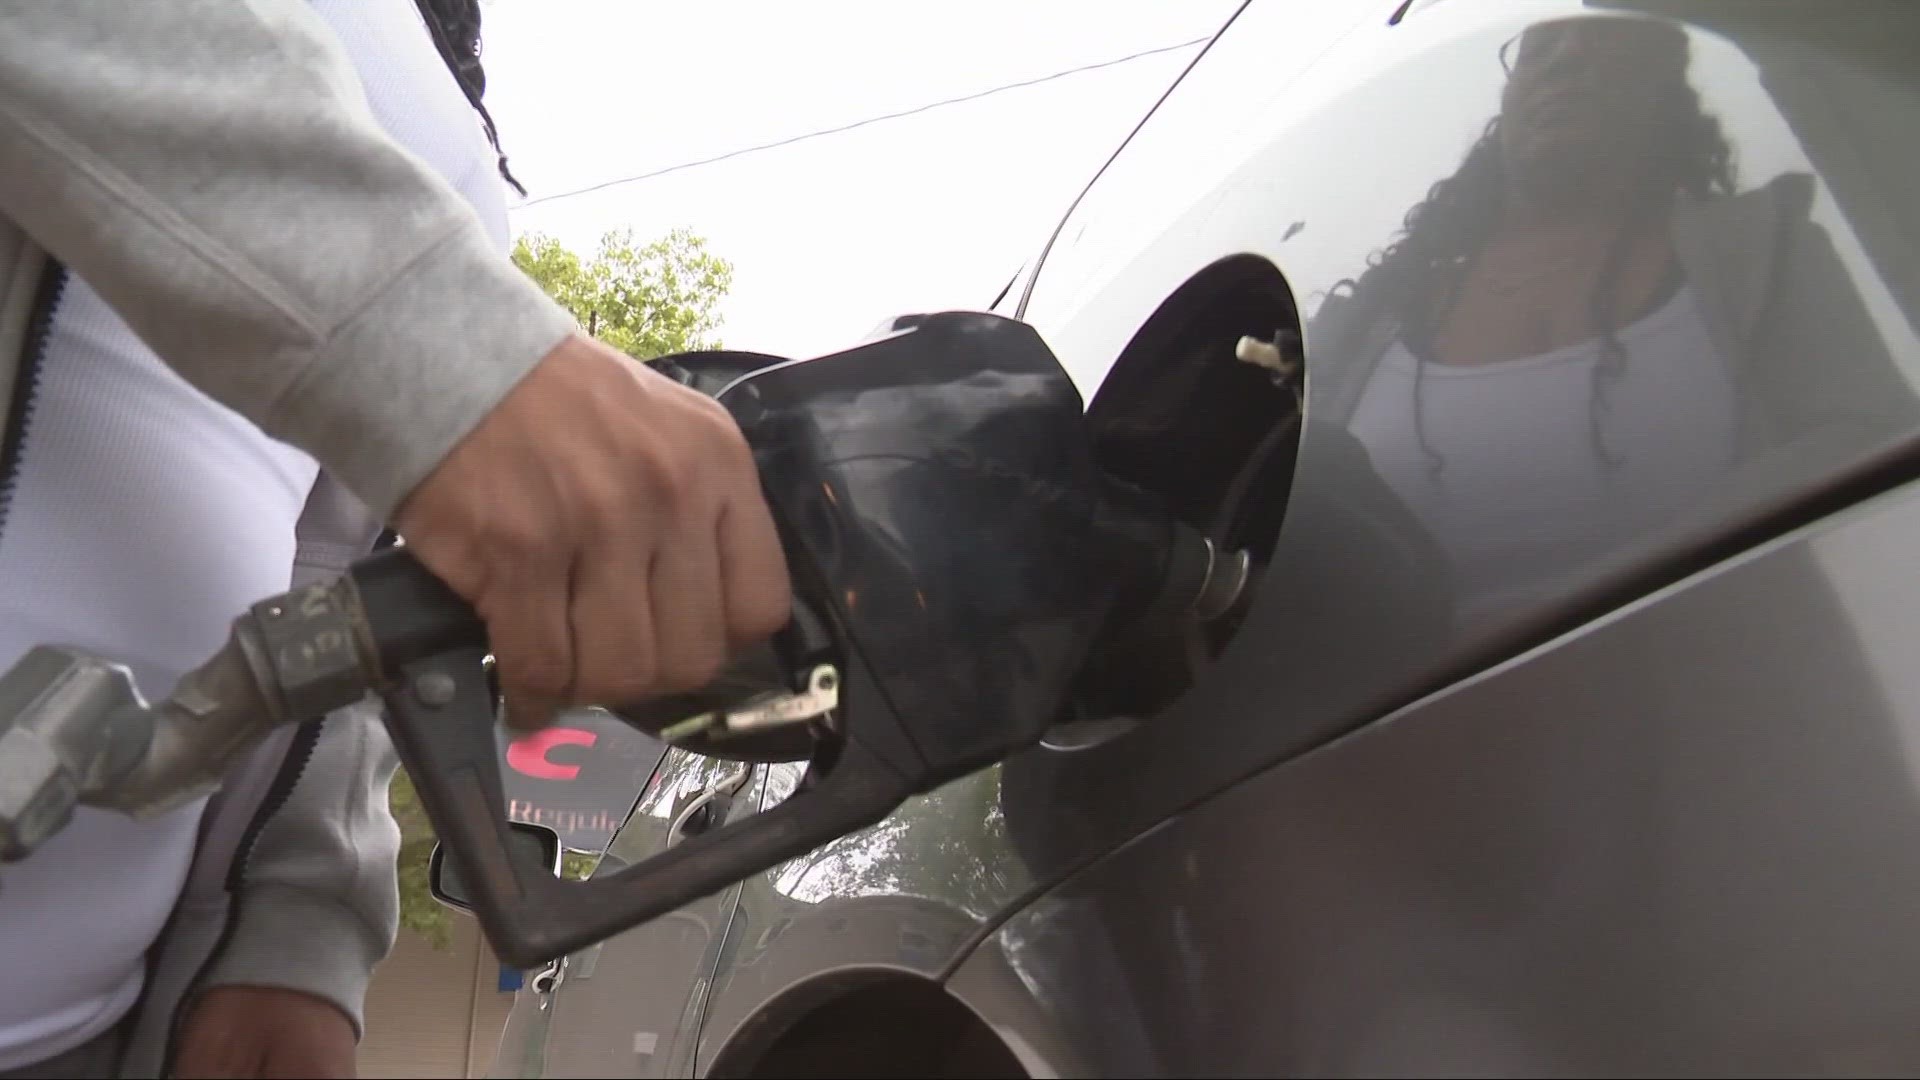 Akron drivers are now paying an average of $3.33 per gallon, while those in Cleveland are seeing an average of $3.42.